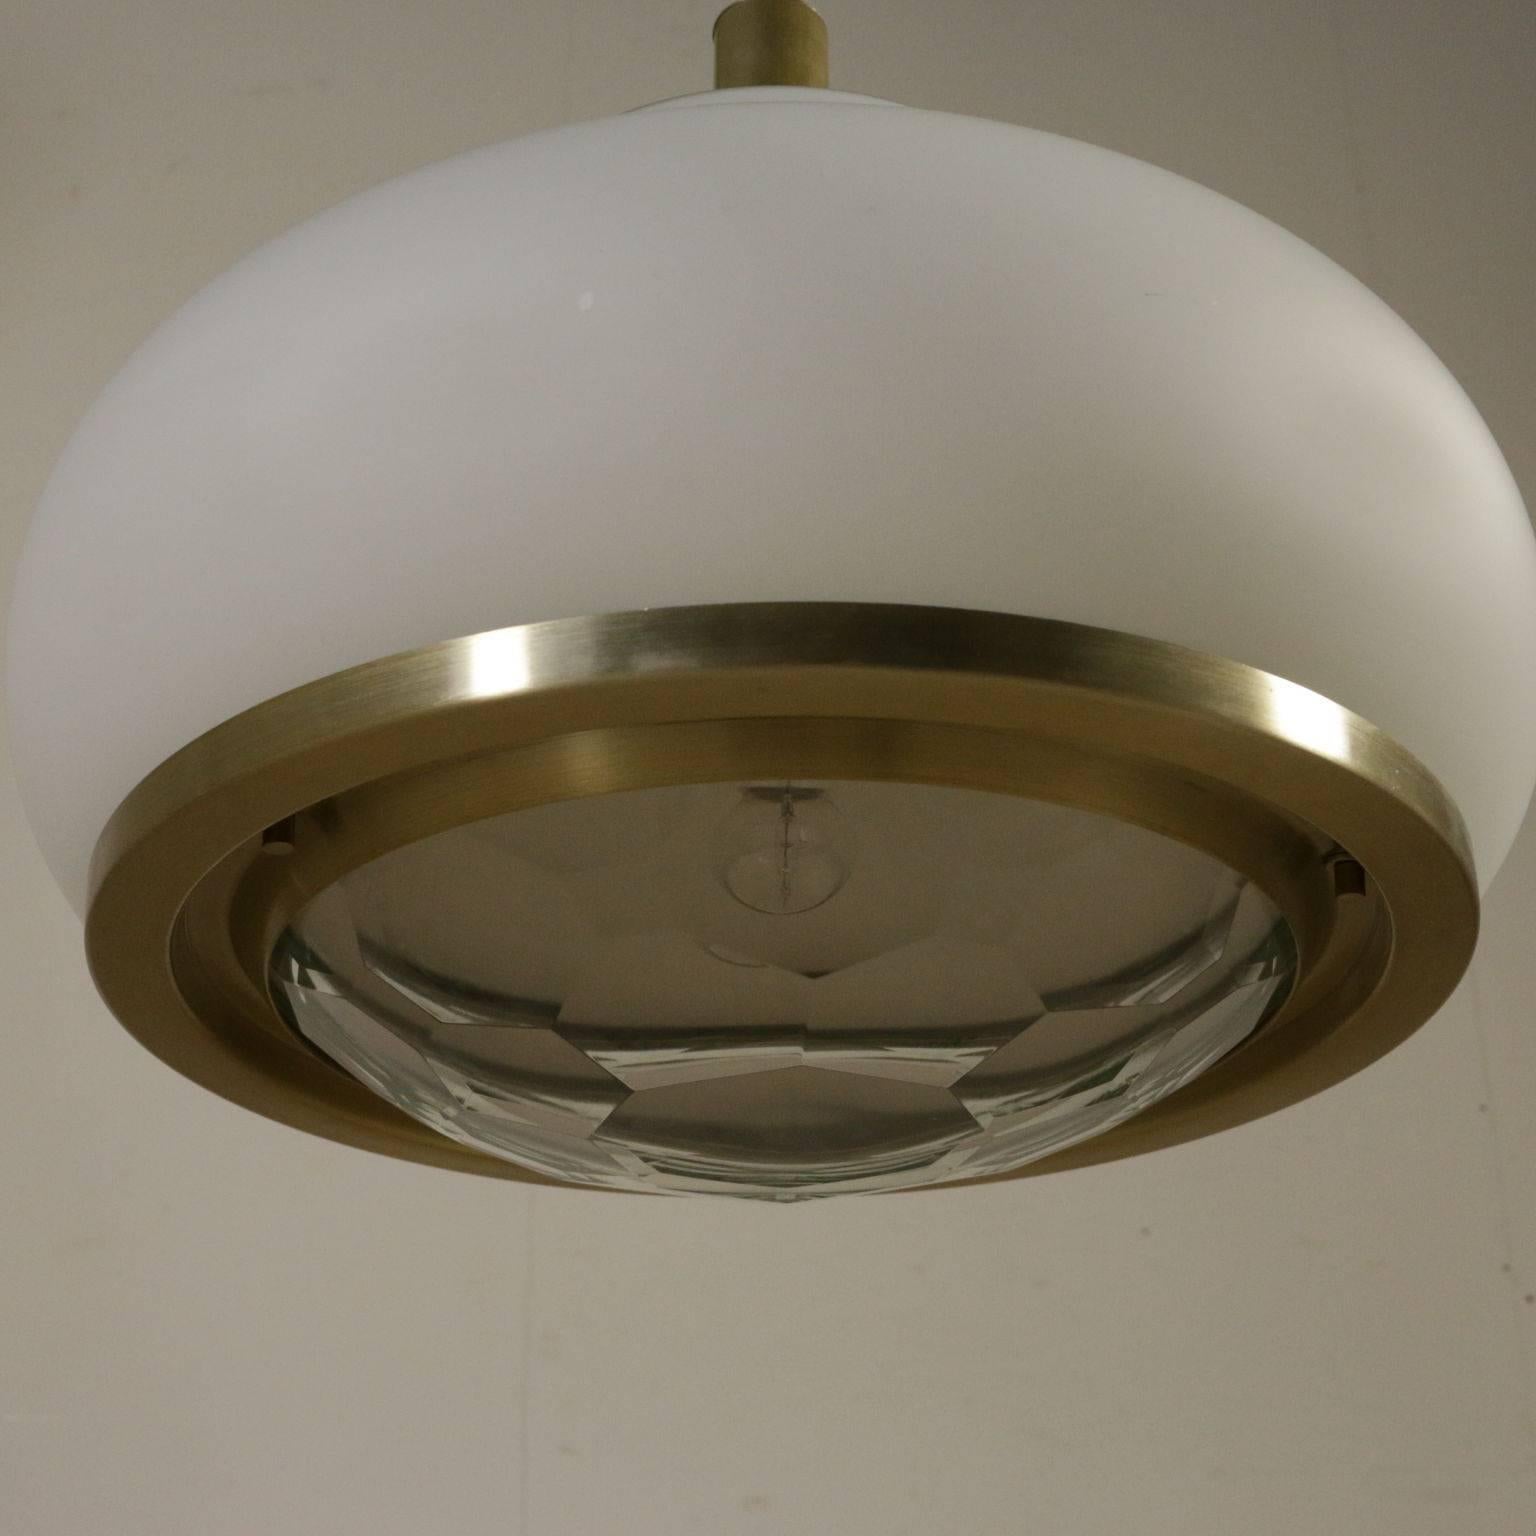 A ceiling lamp designed by Pia Guidetti Crippa for Lumi, glass and brass. Manufactured in Italy, 1960s.